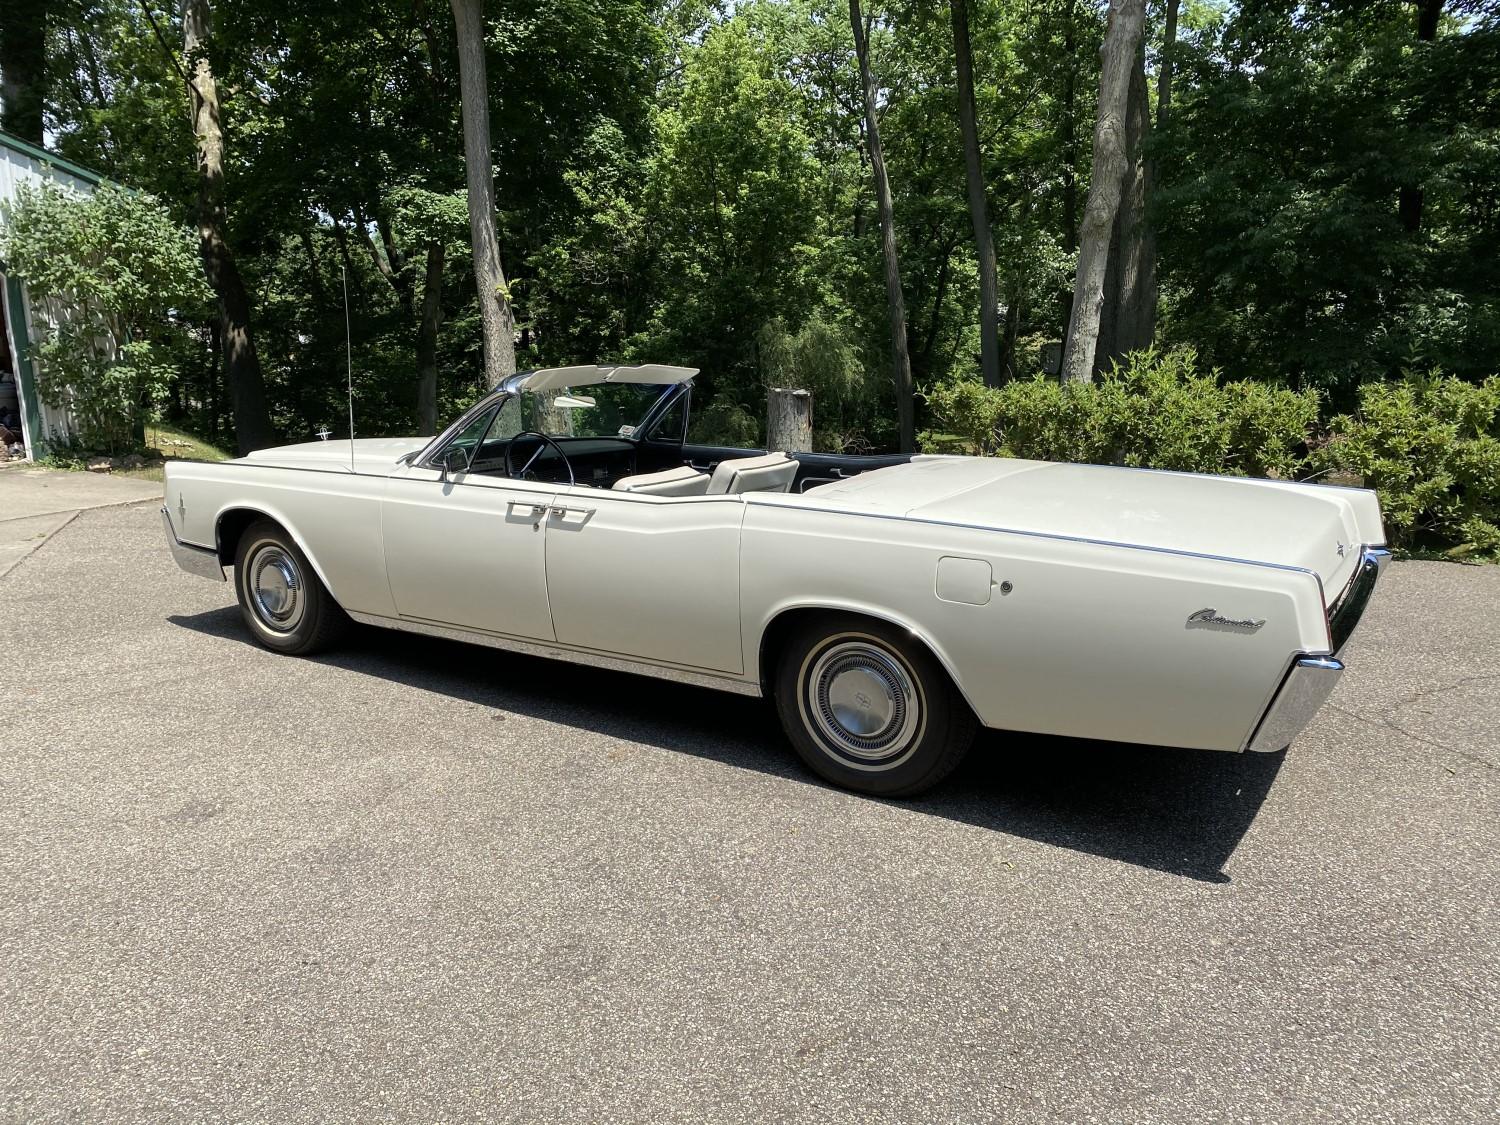 Single owner 1966 Lincoln Continental Convertible in Excellent Condition